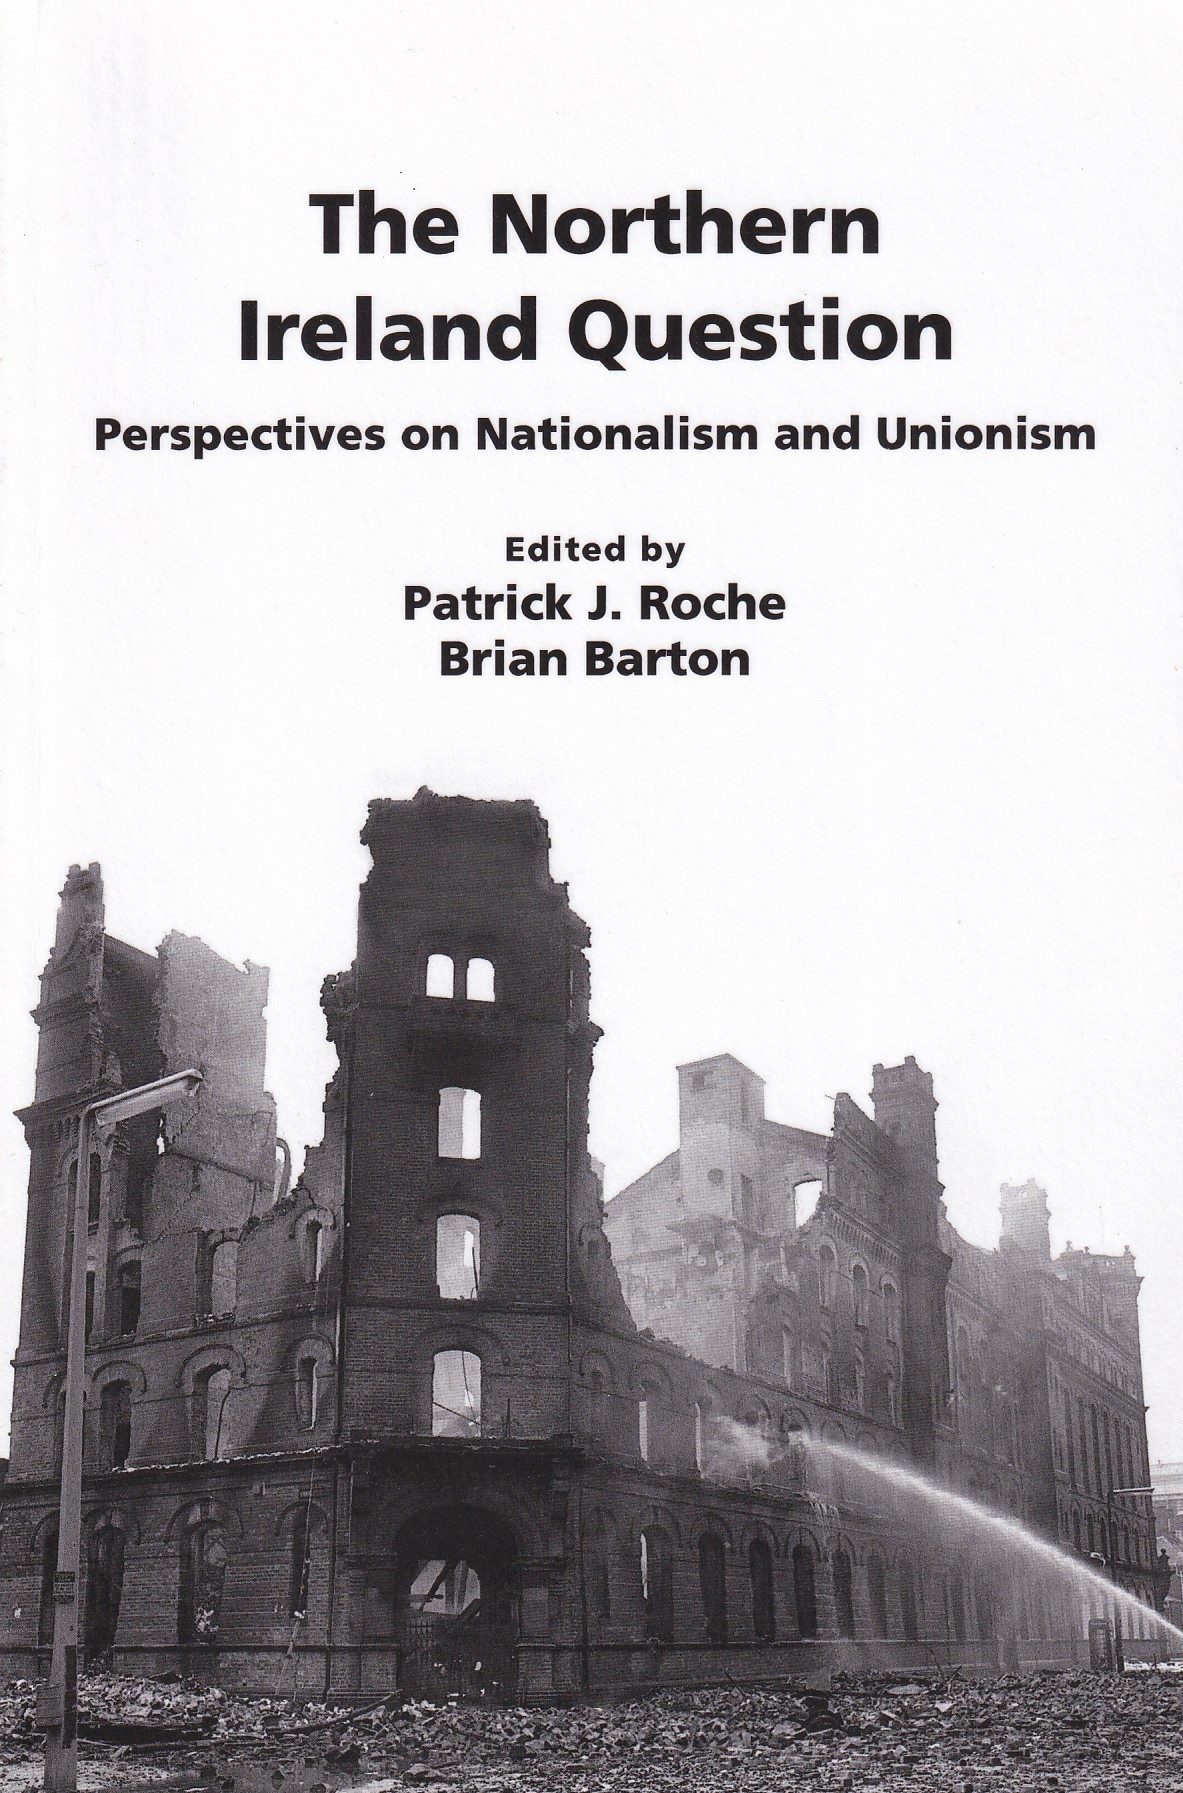 The Northern Ireland Question: Perspectives on Nationalism and Unionism | Patrick J. Roche & Brian Barton | Charlie Byrne's